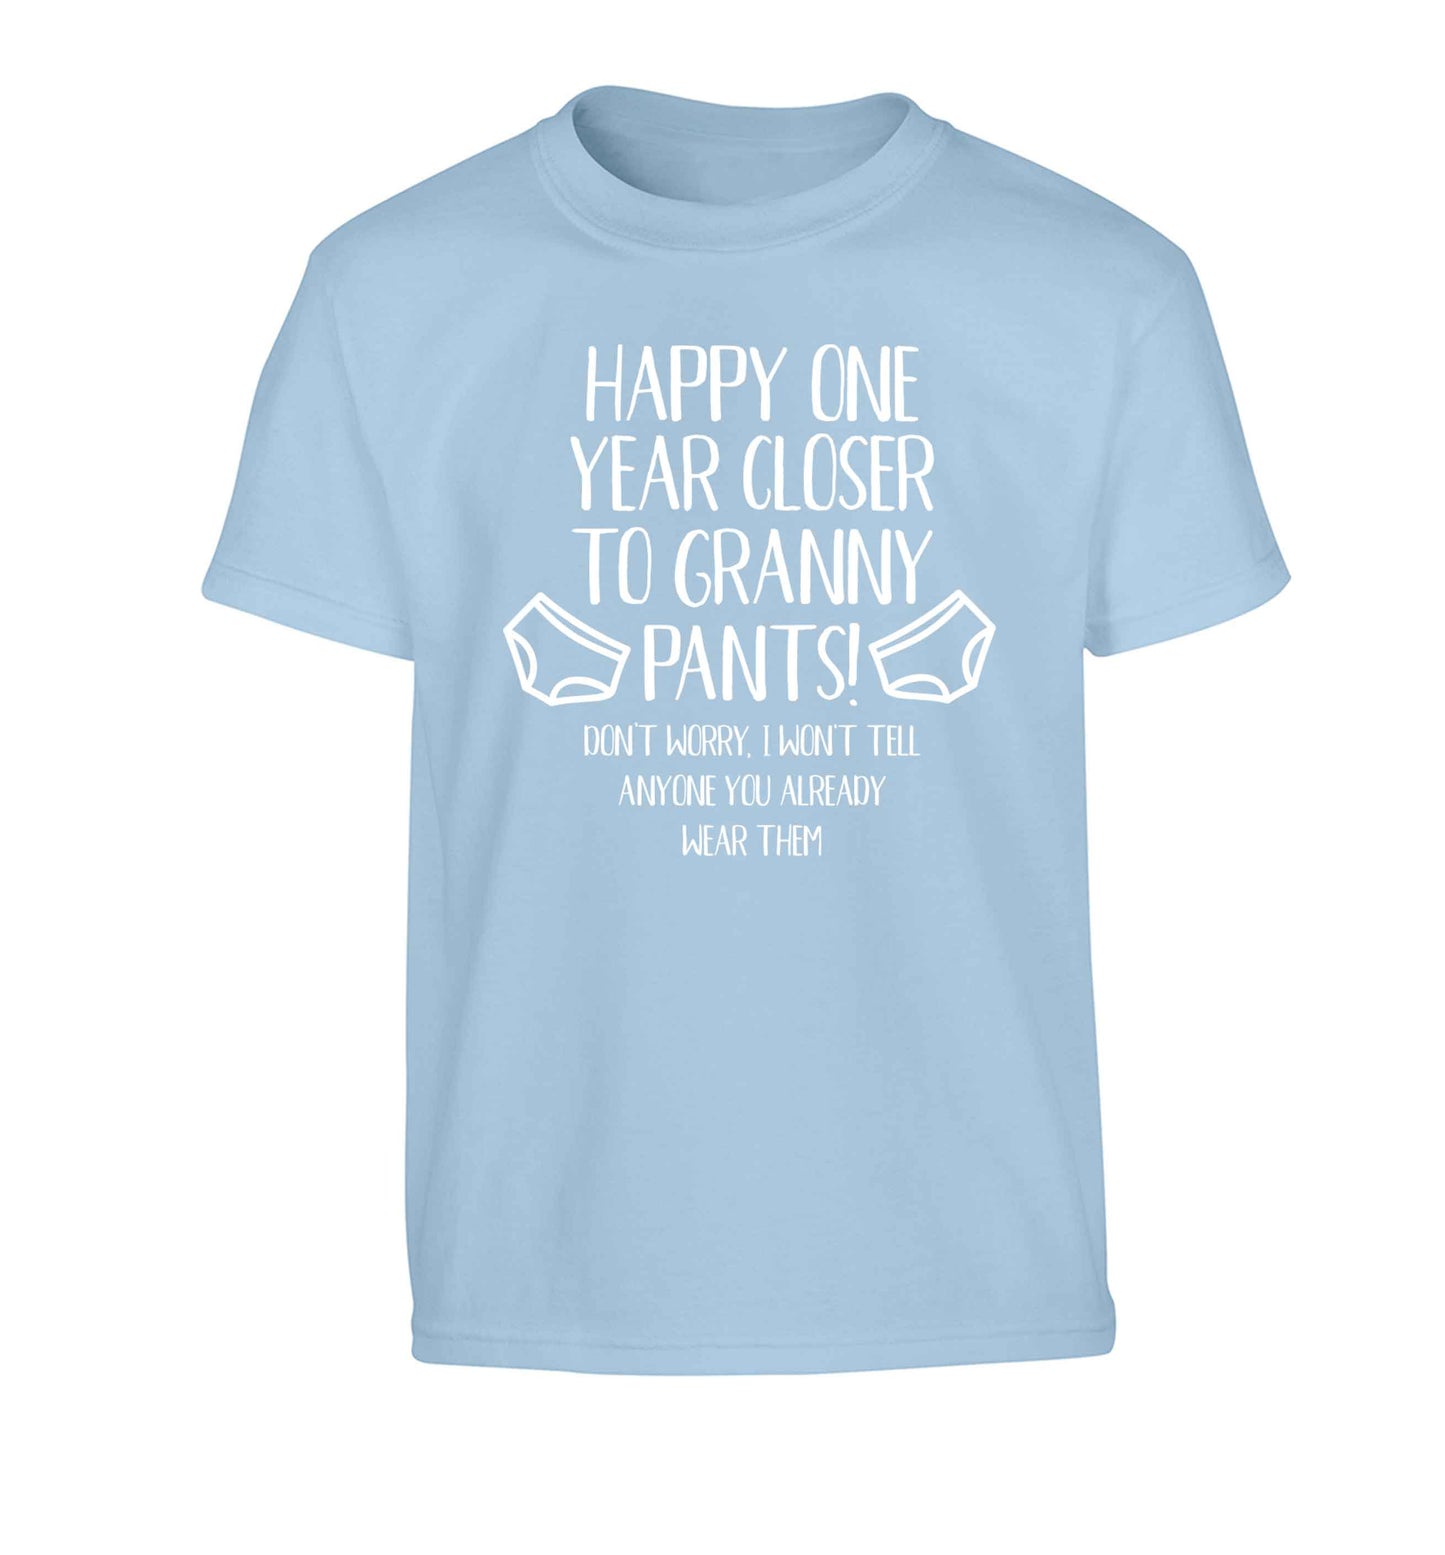 Happy one year closer to granny pants Children's light blue Tshirt 12-13 Years